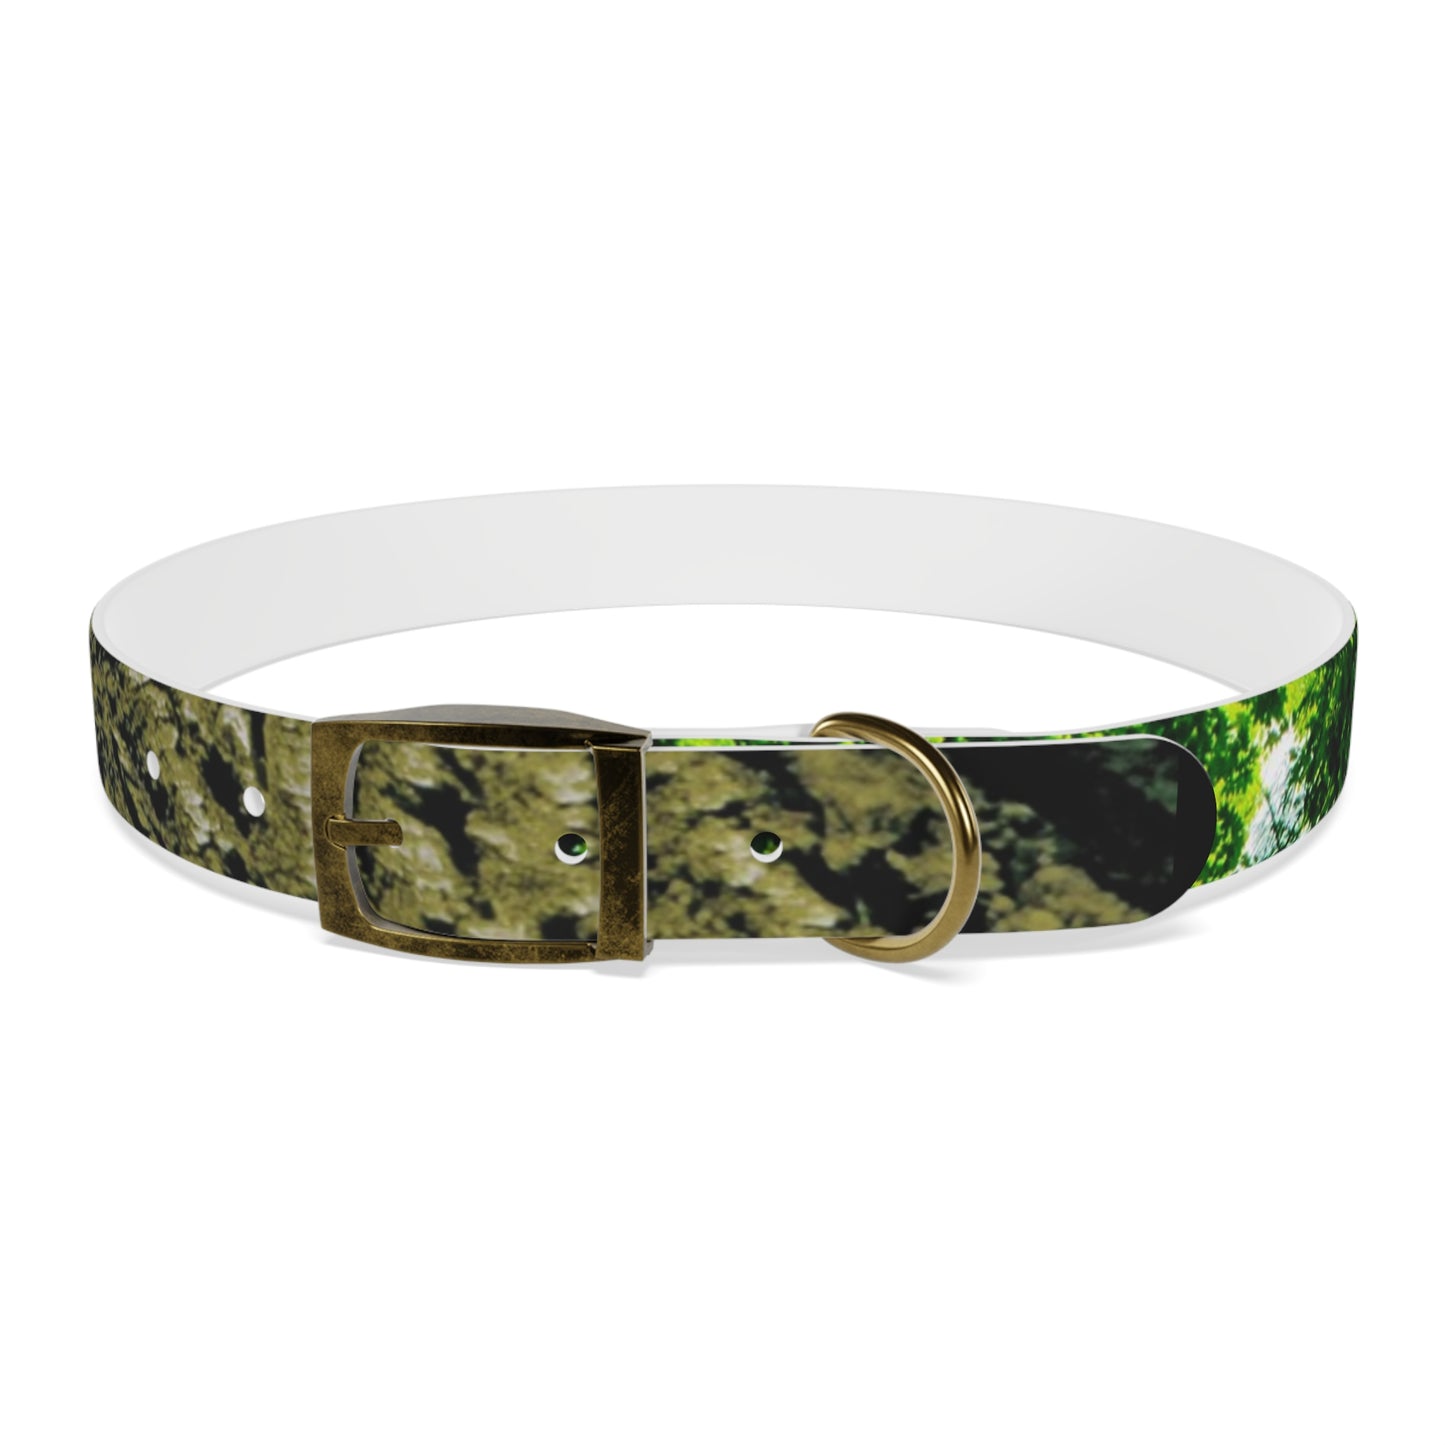 Nature Dog Collar "I'm a disc golfer too" Disc Golf Accessory by Celestial Discs